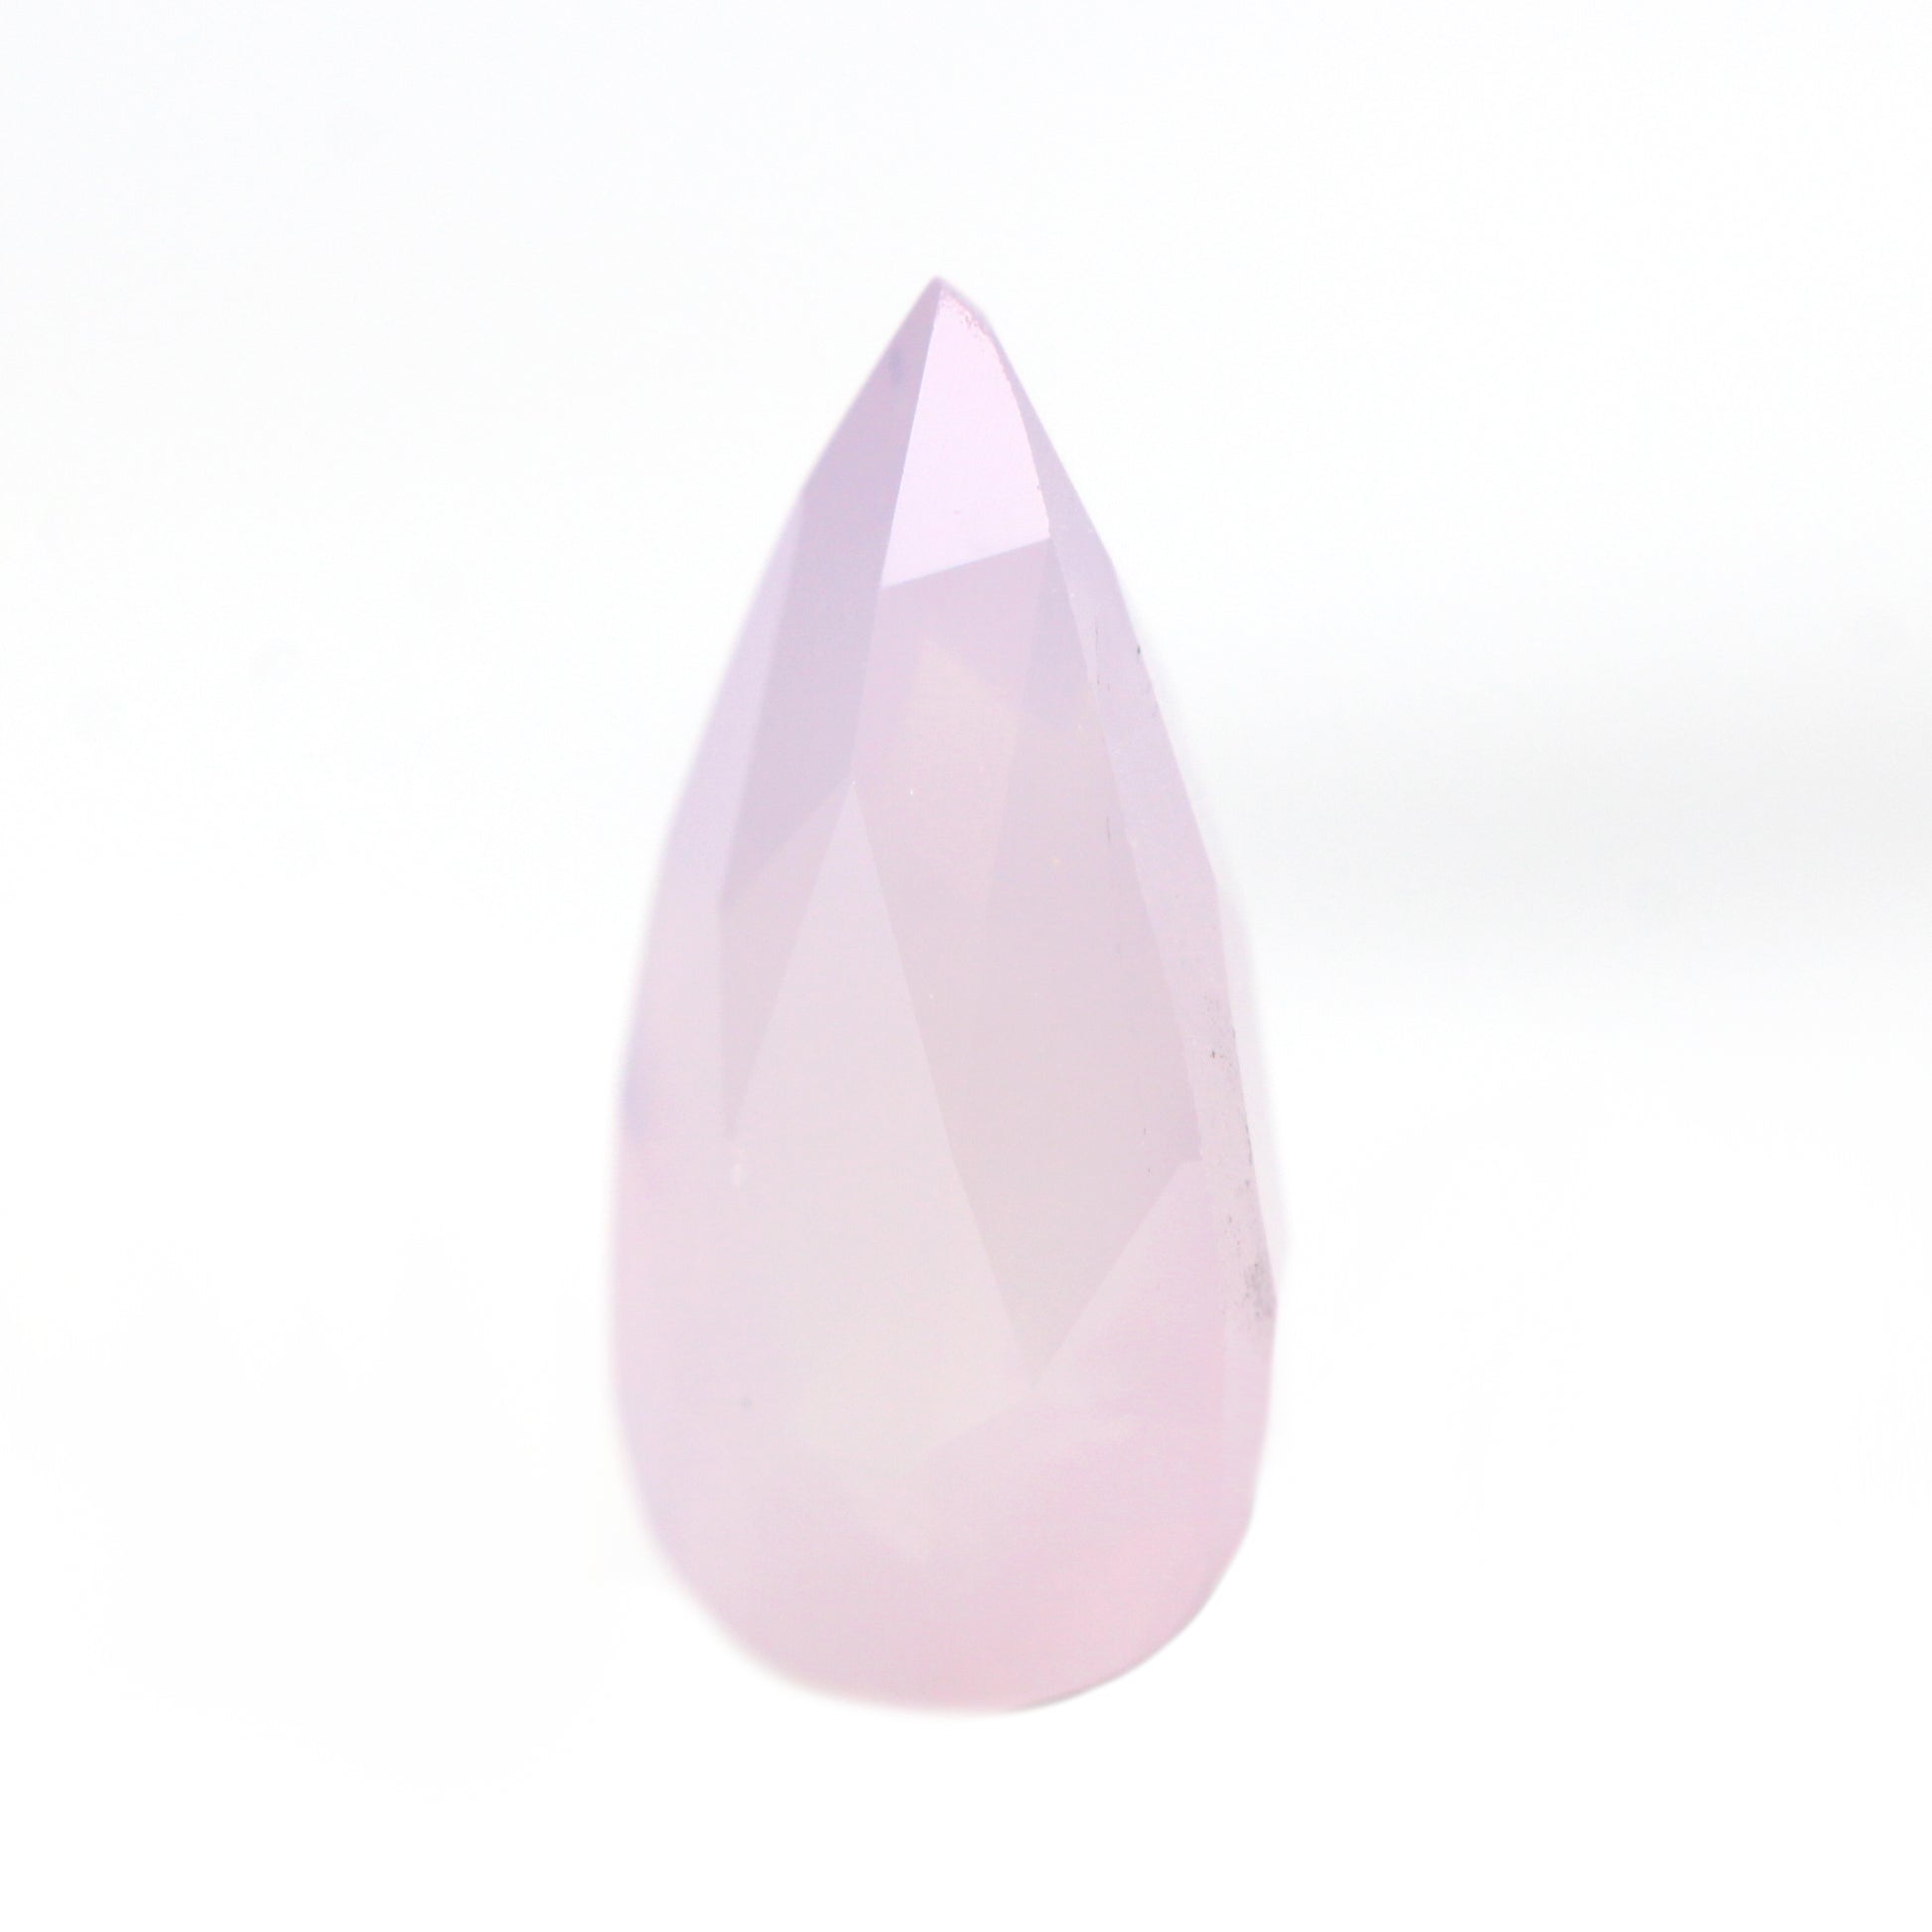 1.13 Carat Opalescent Pink Pear Sapphire for Custom Work - Inventory Code PPS113 - Midwinter Co. Alternative Bridal Rings and Modern Fine Jewelry